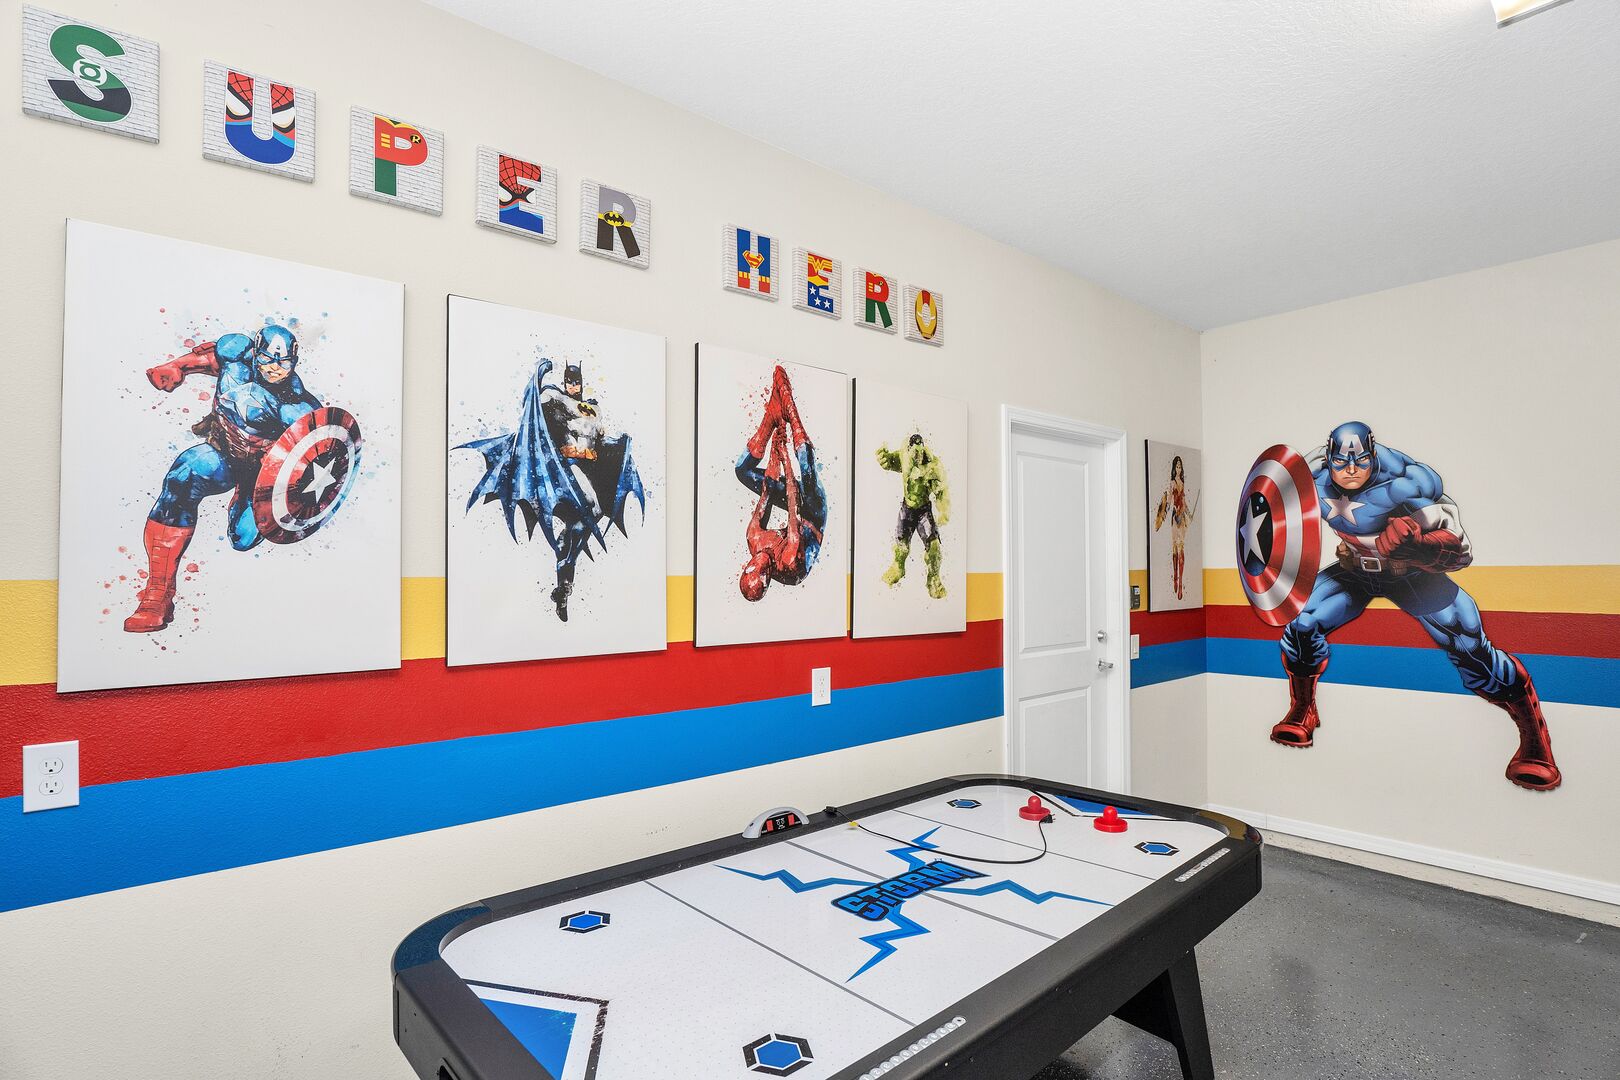 Game room for the kids!